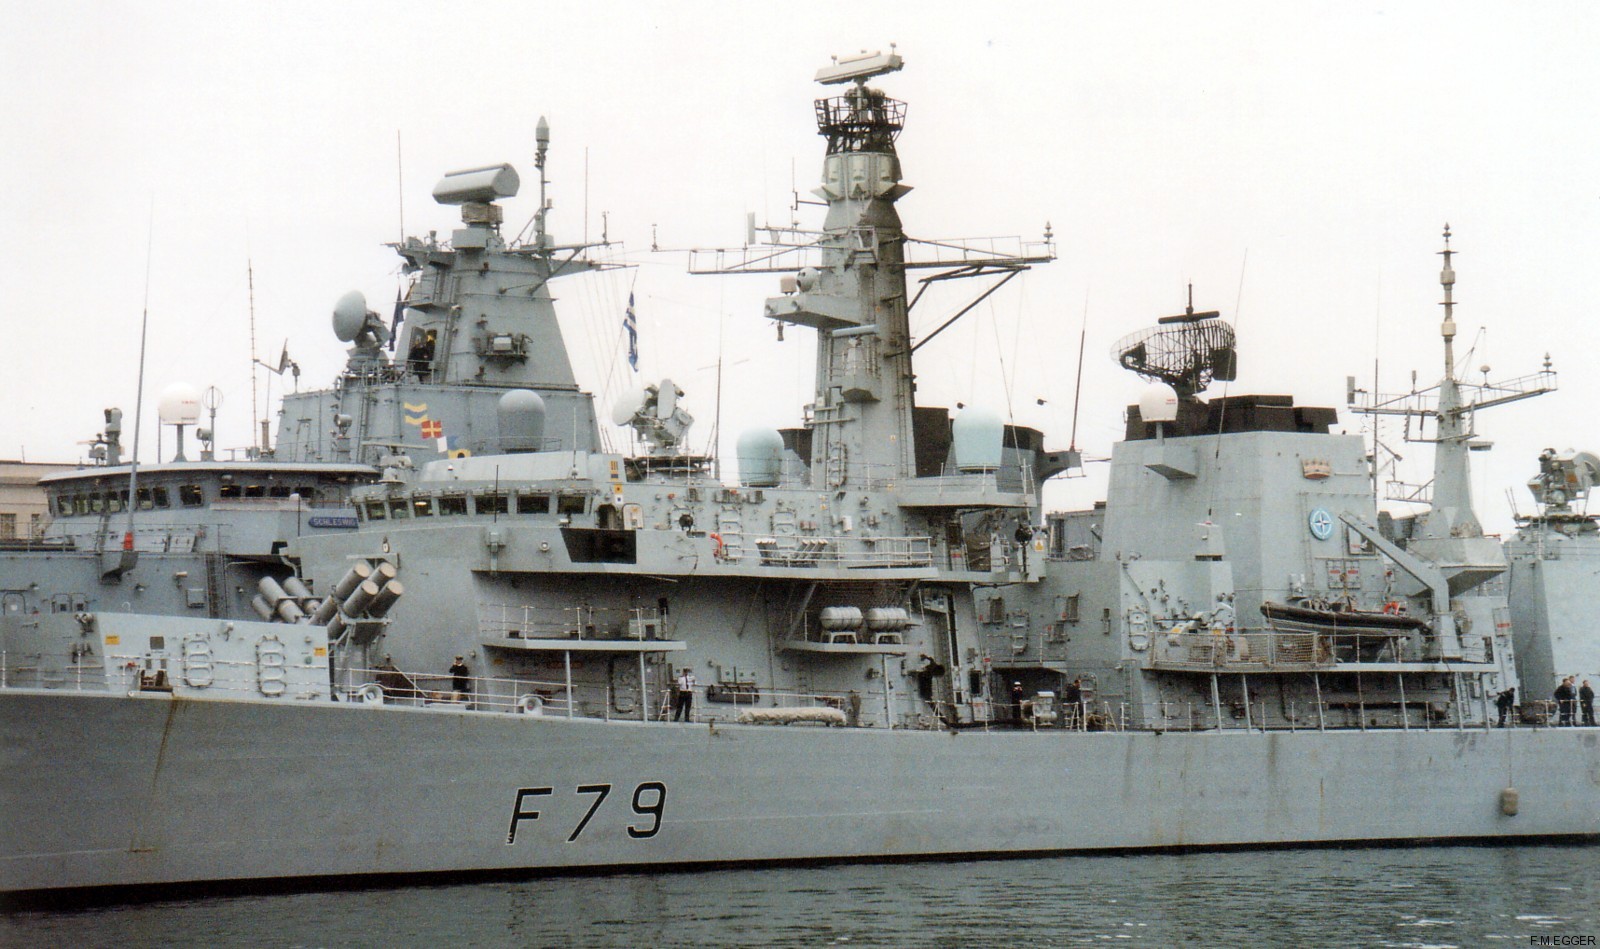 f-79 hms portland type 23 duke class guided missile frigate ffg royal navy stanavformed trieste italy 20